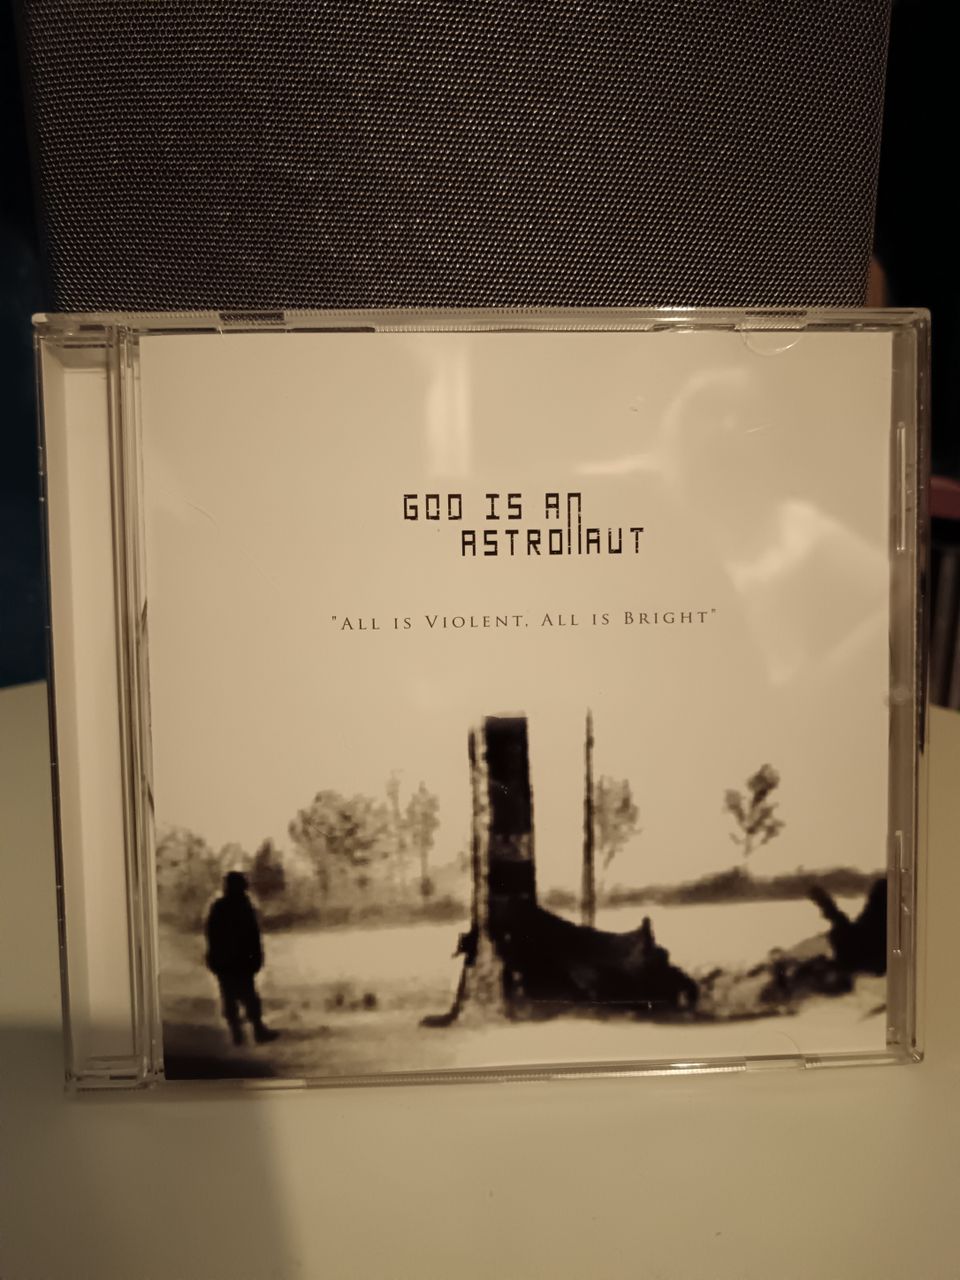 God is an astronaut: All is violent, all is bright -cd